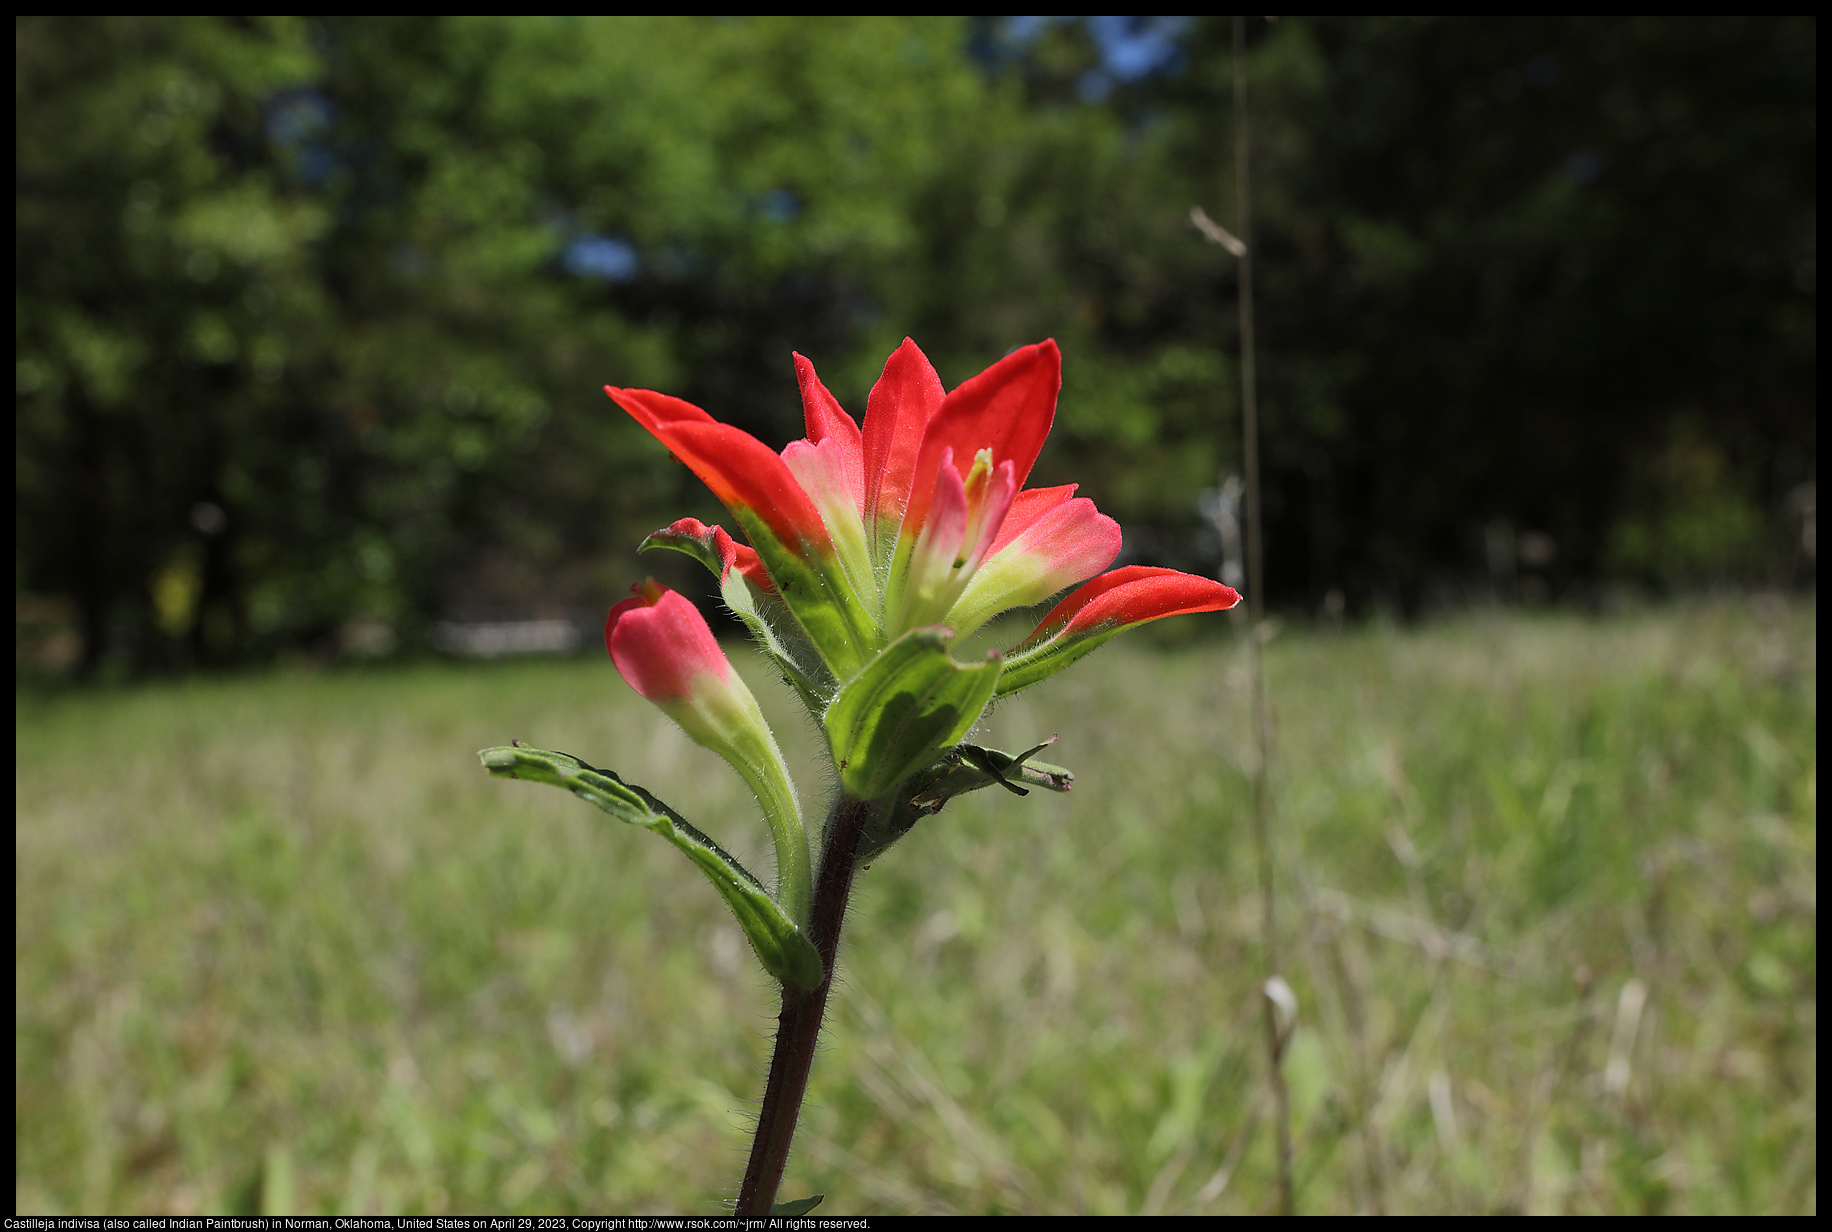 Castilleja indivisa (also called Indian Paintbrush) in Norman, Oklahoma, United States on April 29, 2023